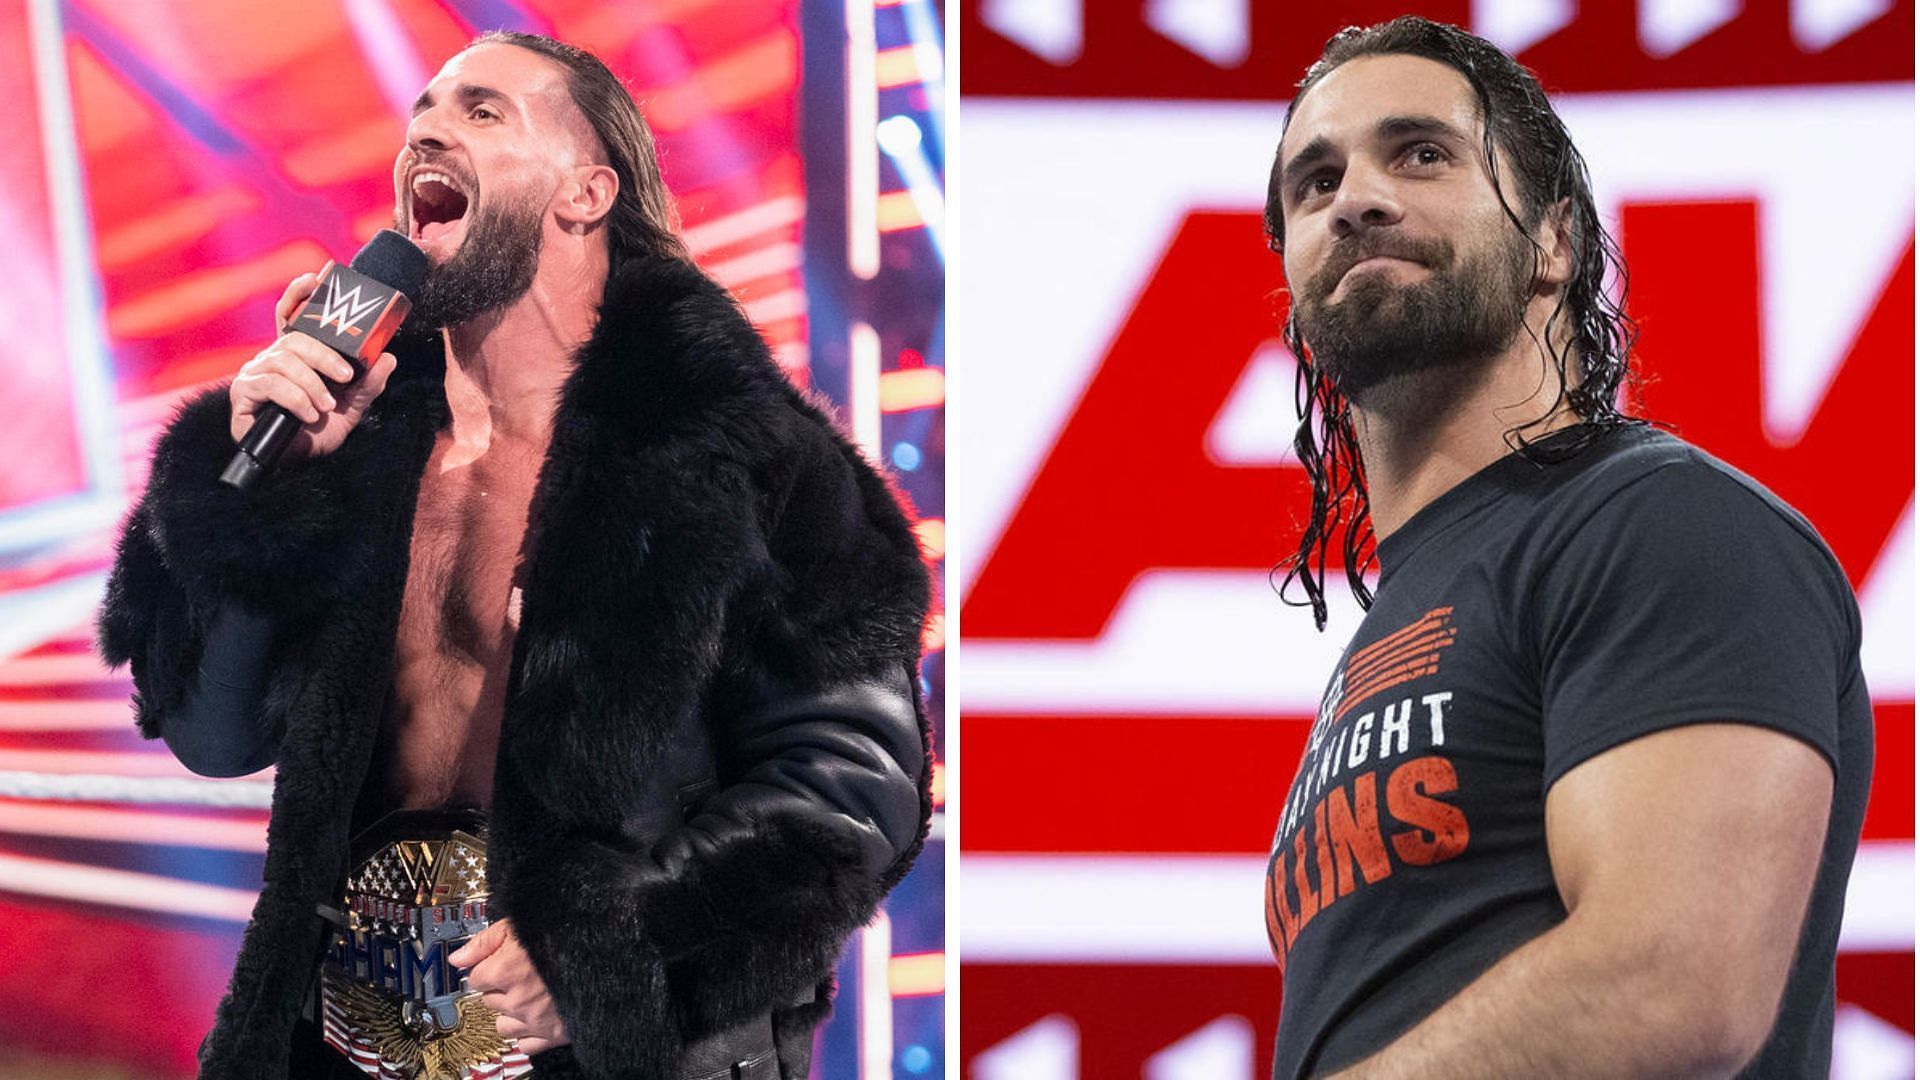 Seth Rollins recently held the United States Championship on WWE RAW